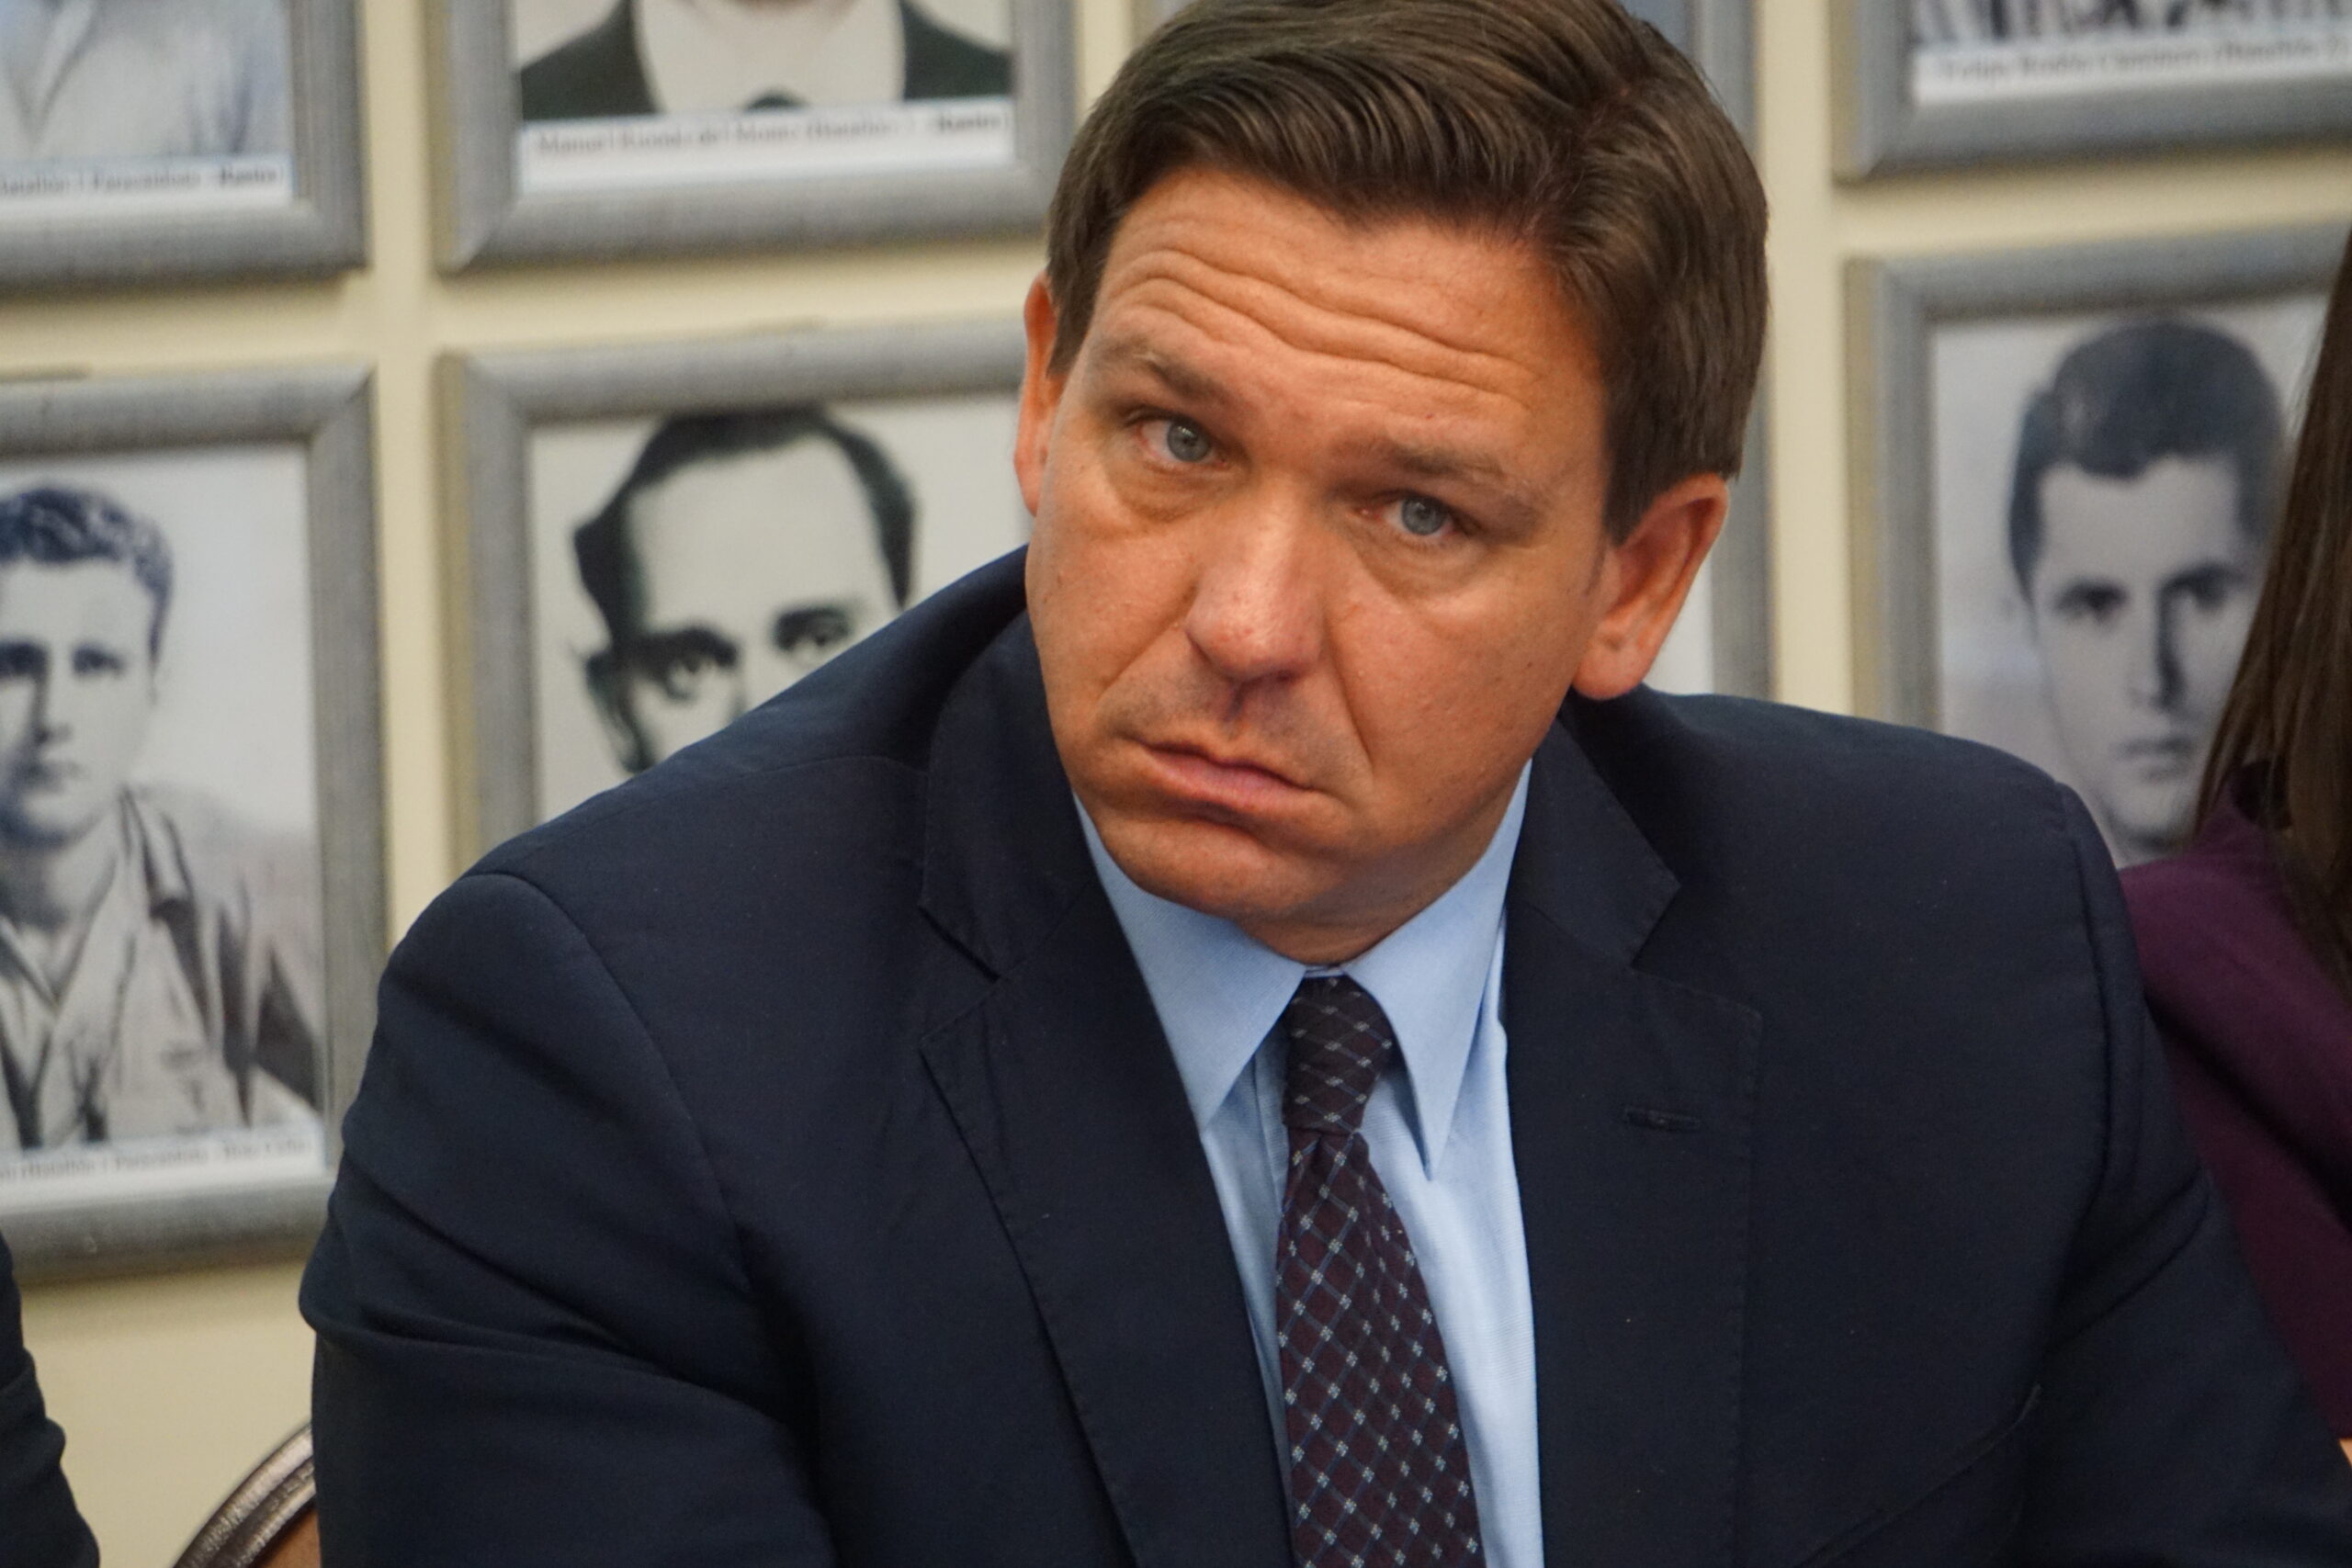 DeSantis Says Democrats Will 'Support Forced Firing' in Special Session